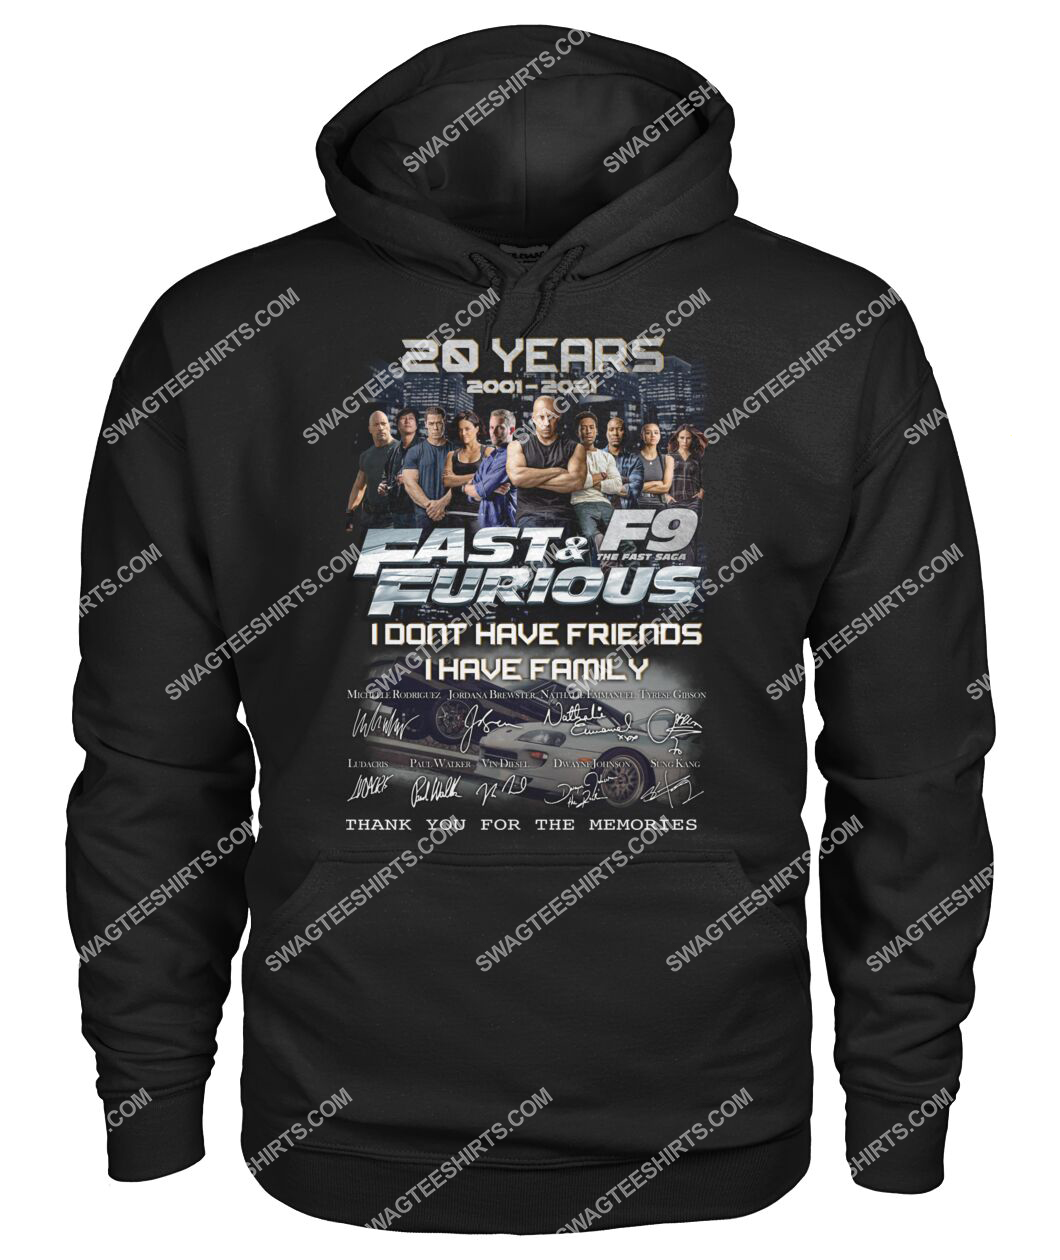 fast and furious 20 years i don't have friends i have family hoodie 1